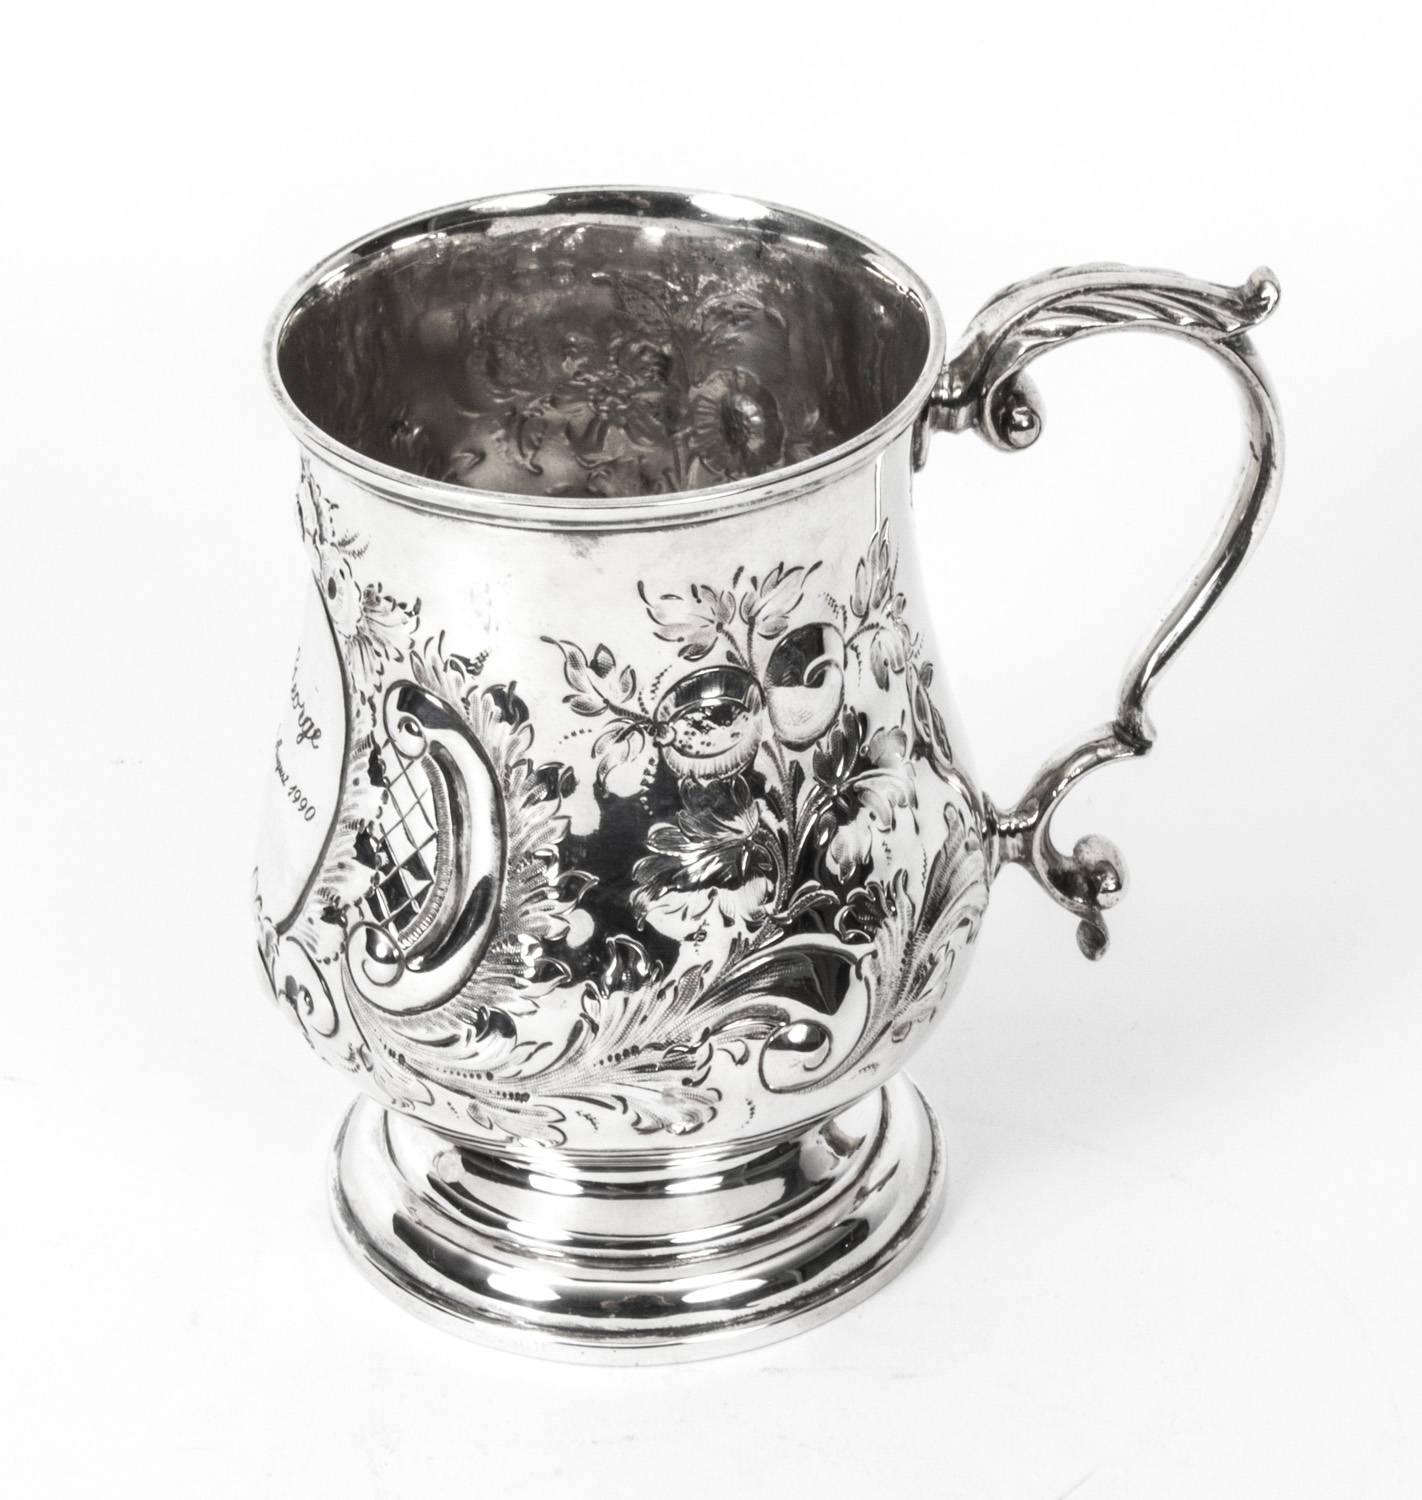 This is a delightful antique Victorian English silver plated engraved and embossed mug, circa 1870 in date.

 
Condition:
In excellent condition, please see photos for confirmation.

Dimensions in cm:
Height 13 x width 13 x depth 10

Dimensions in